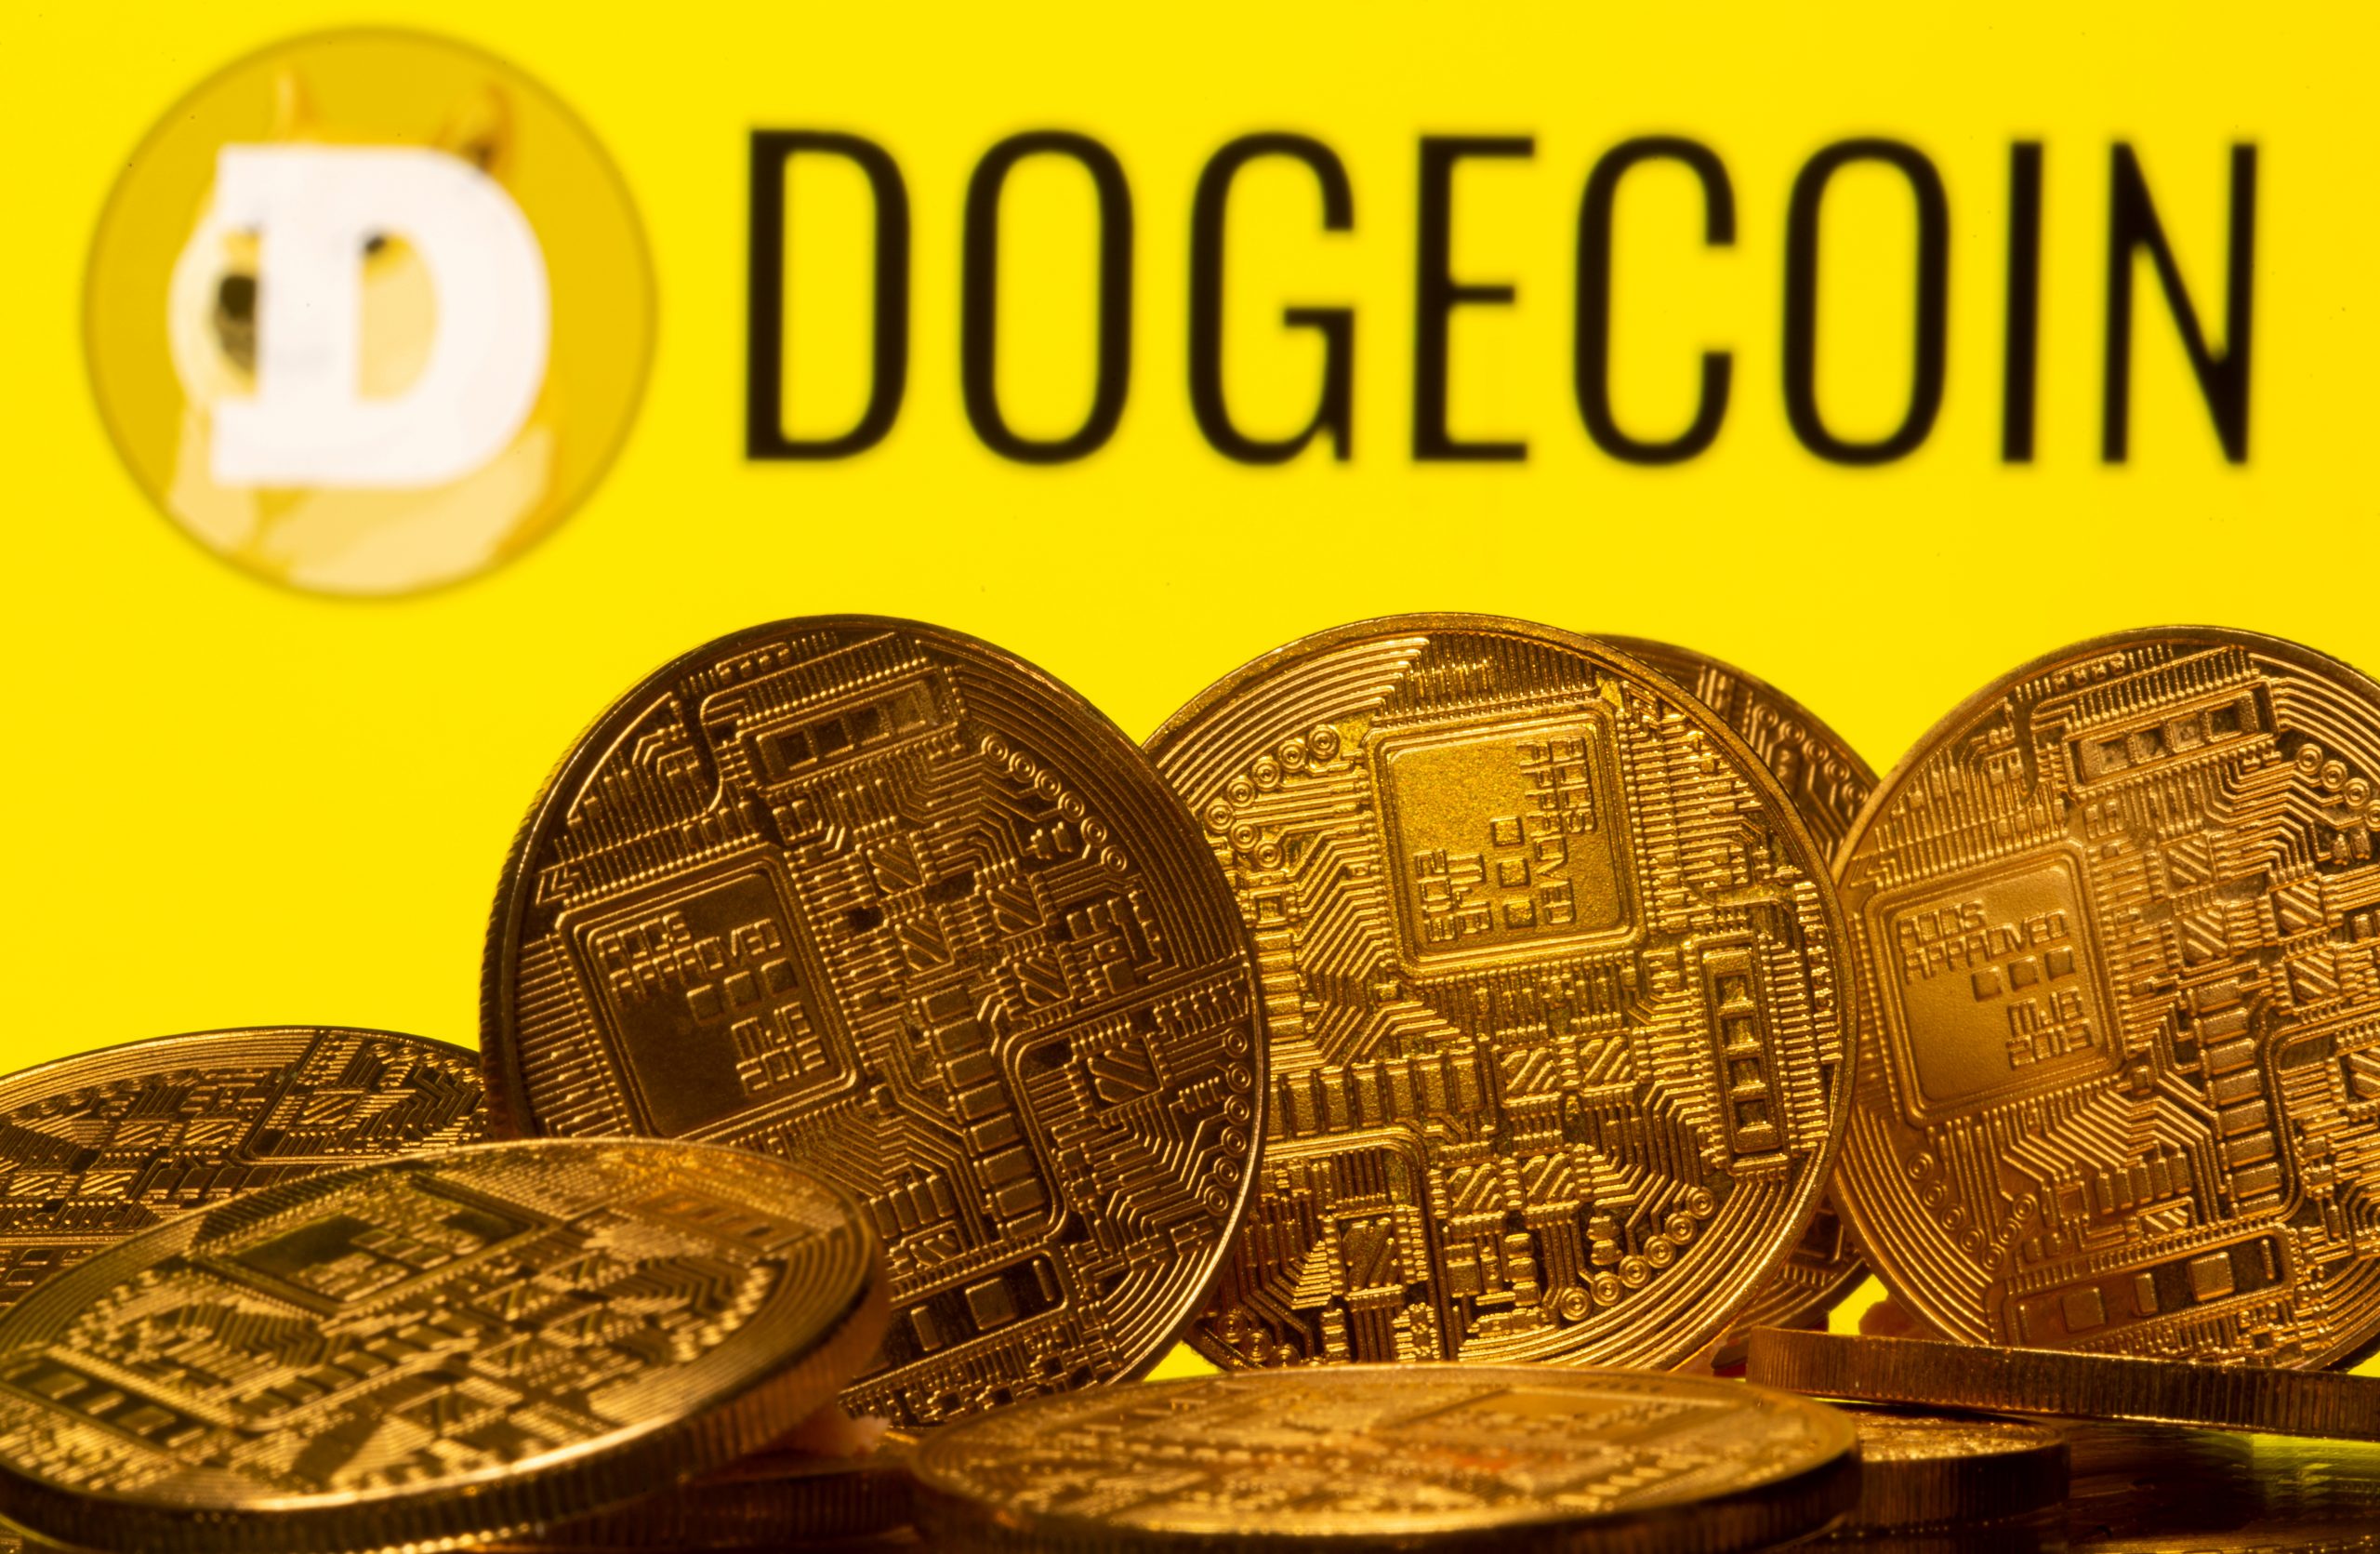  Dogecoin jumps on news of launch on Coinbase Pro